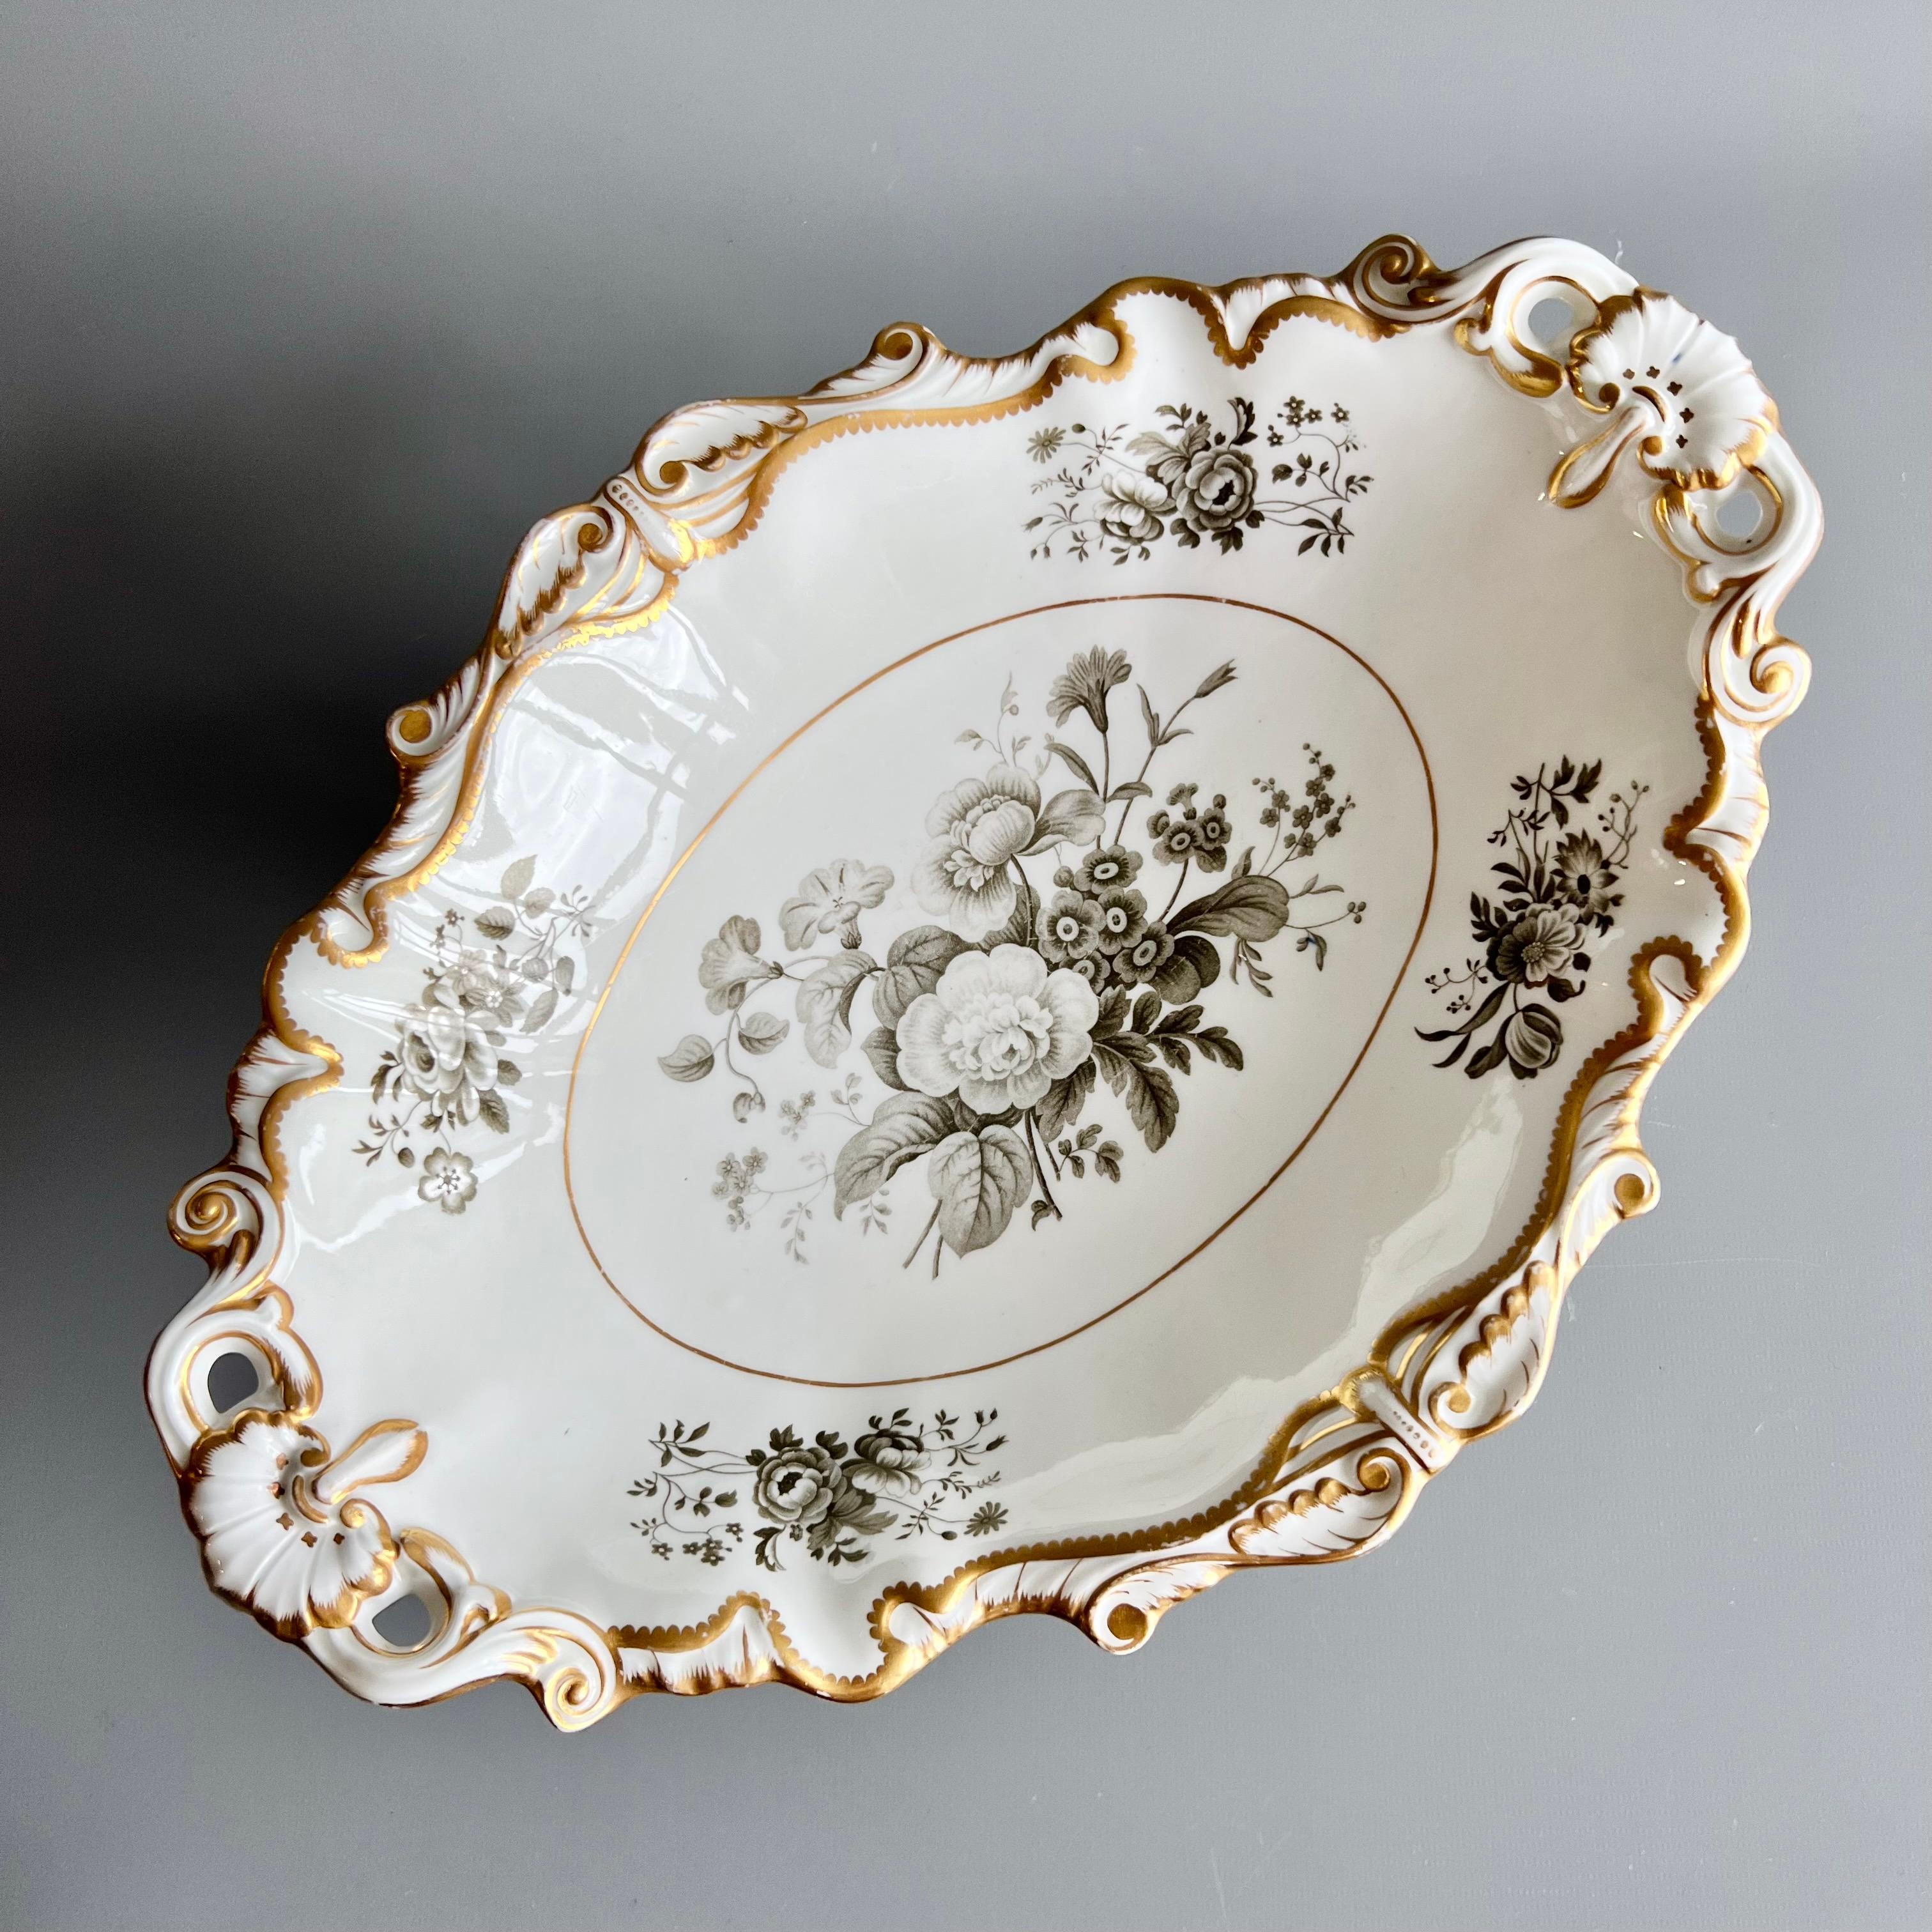 Minton Dessert Service, Inverted Shell White with Monochrome Flowers, ca 1830 For Sale 3